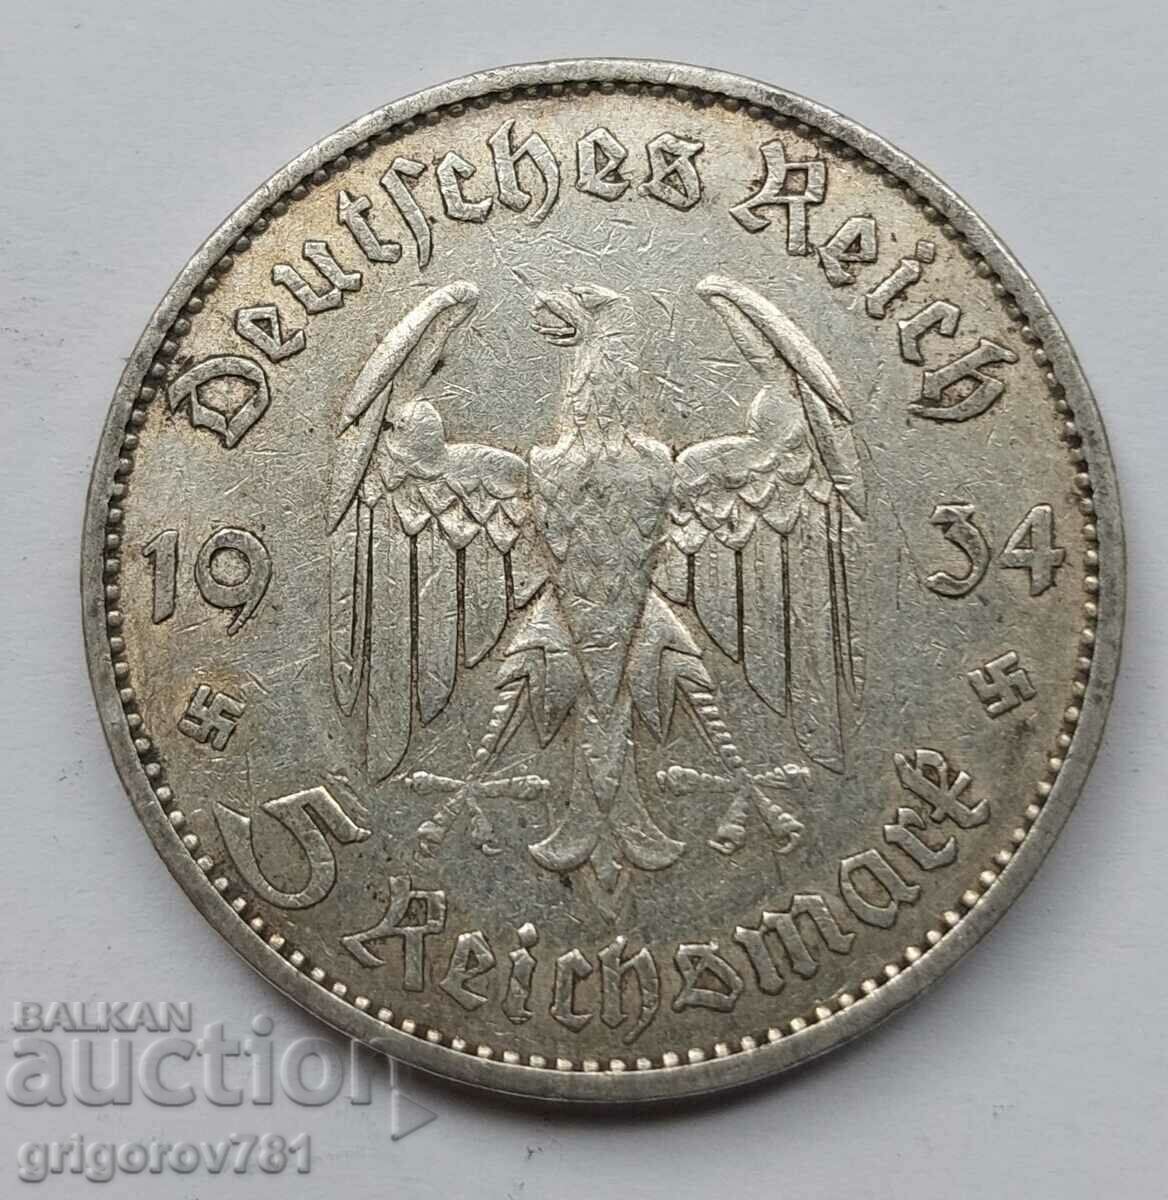 5 Mark Silver Germany 1934 A III Reich Silver Coin #10